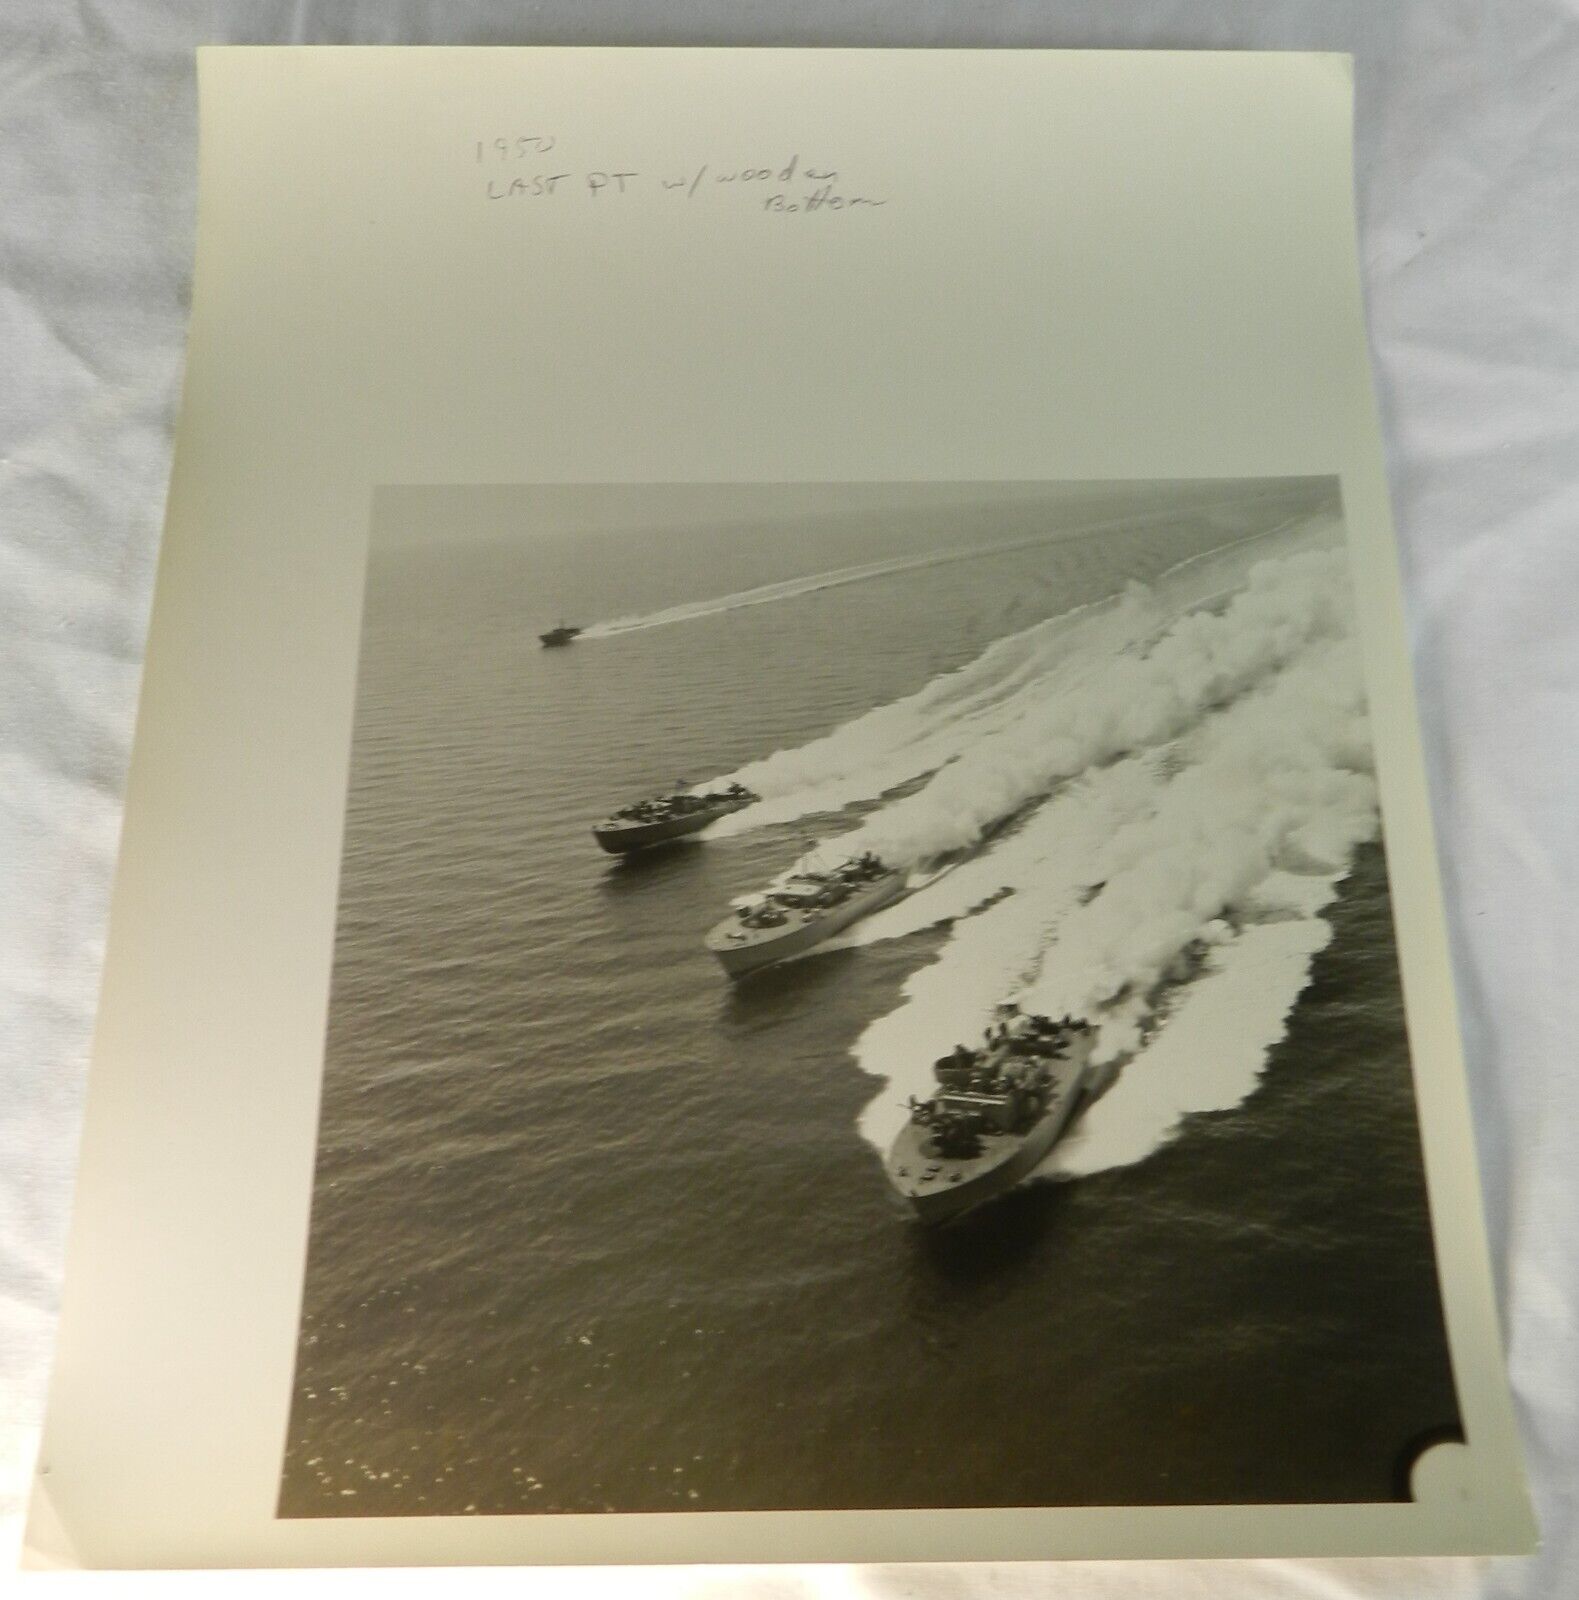 Vintage 1950 US Navy Press Photo - Last PT Boat with Wooden Bottom